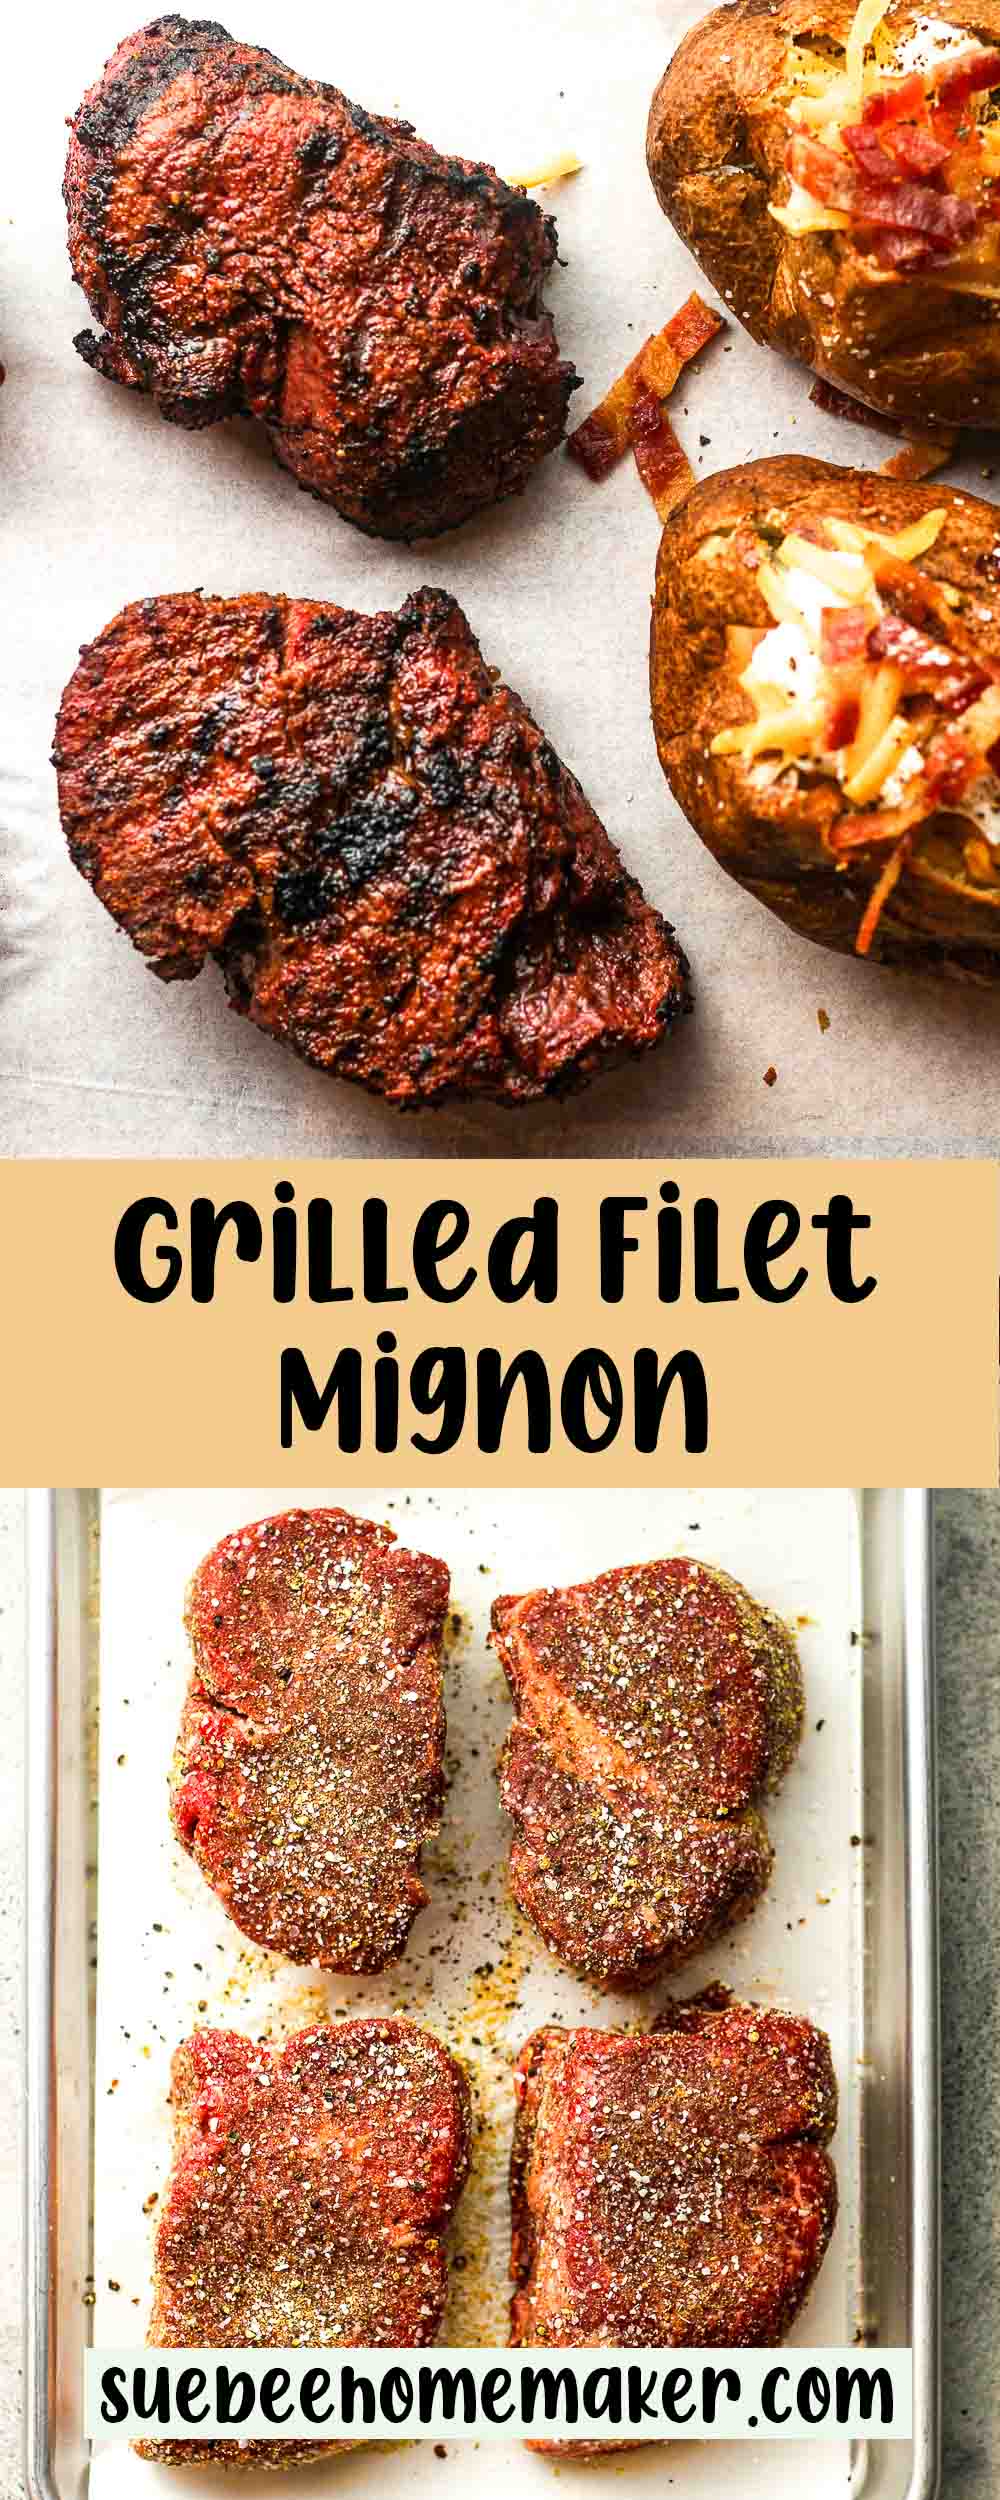 A collage of photos of grilled filet mignon.